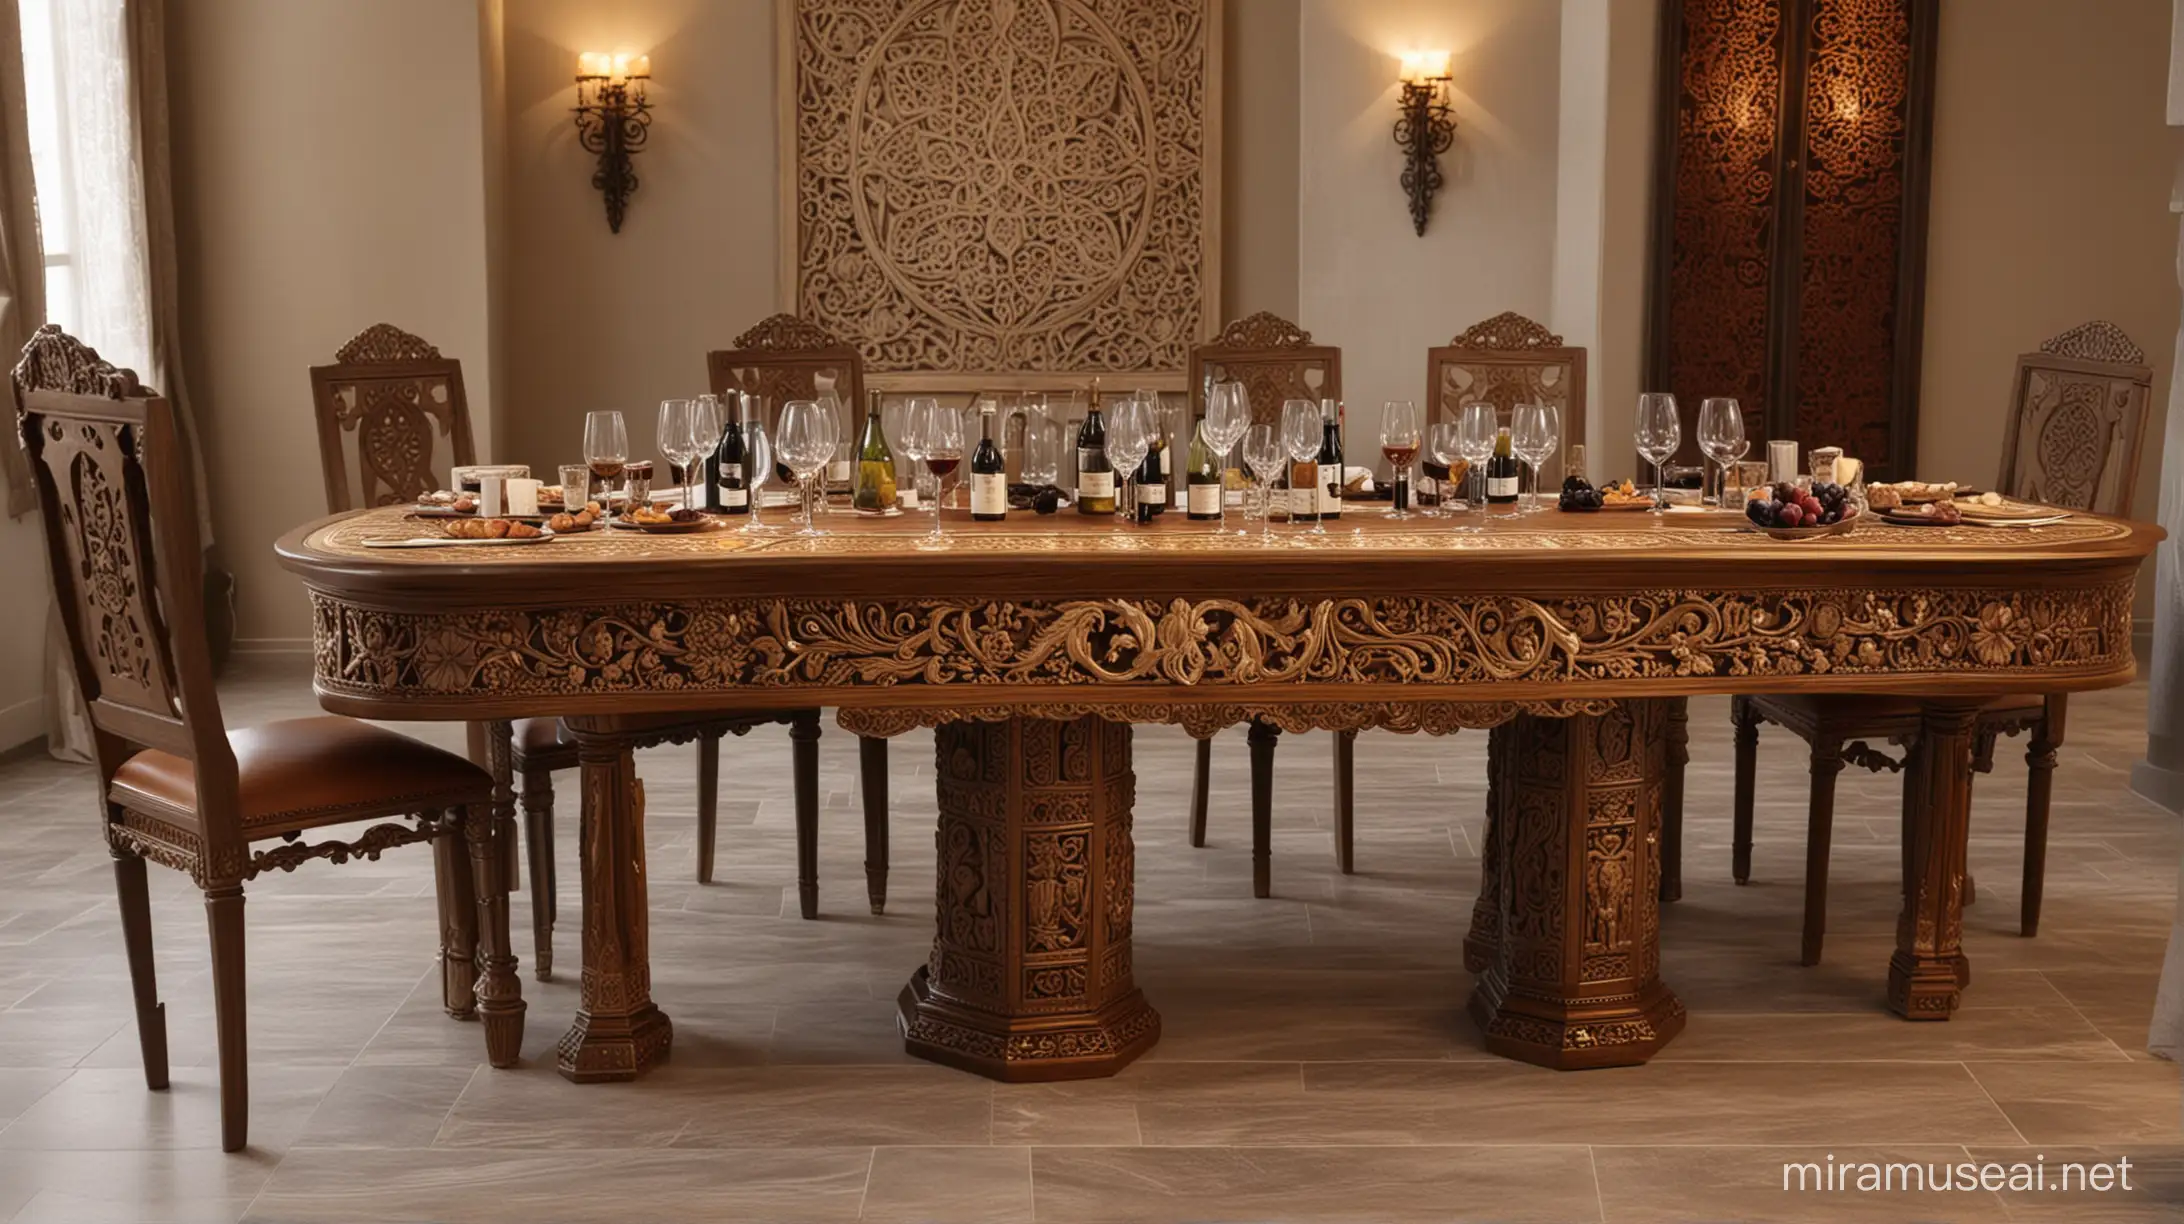 Armenian Royal Wine Tasting Table Luxurious 2060 Experience with Traditional Ornaments